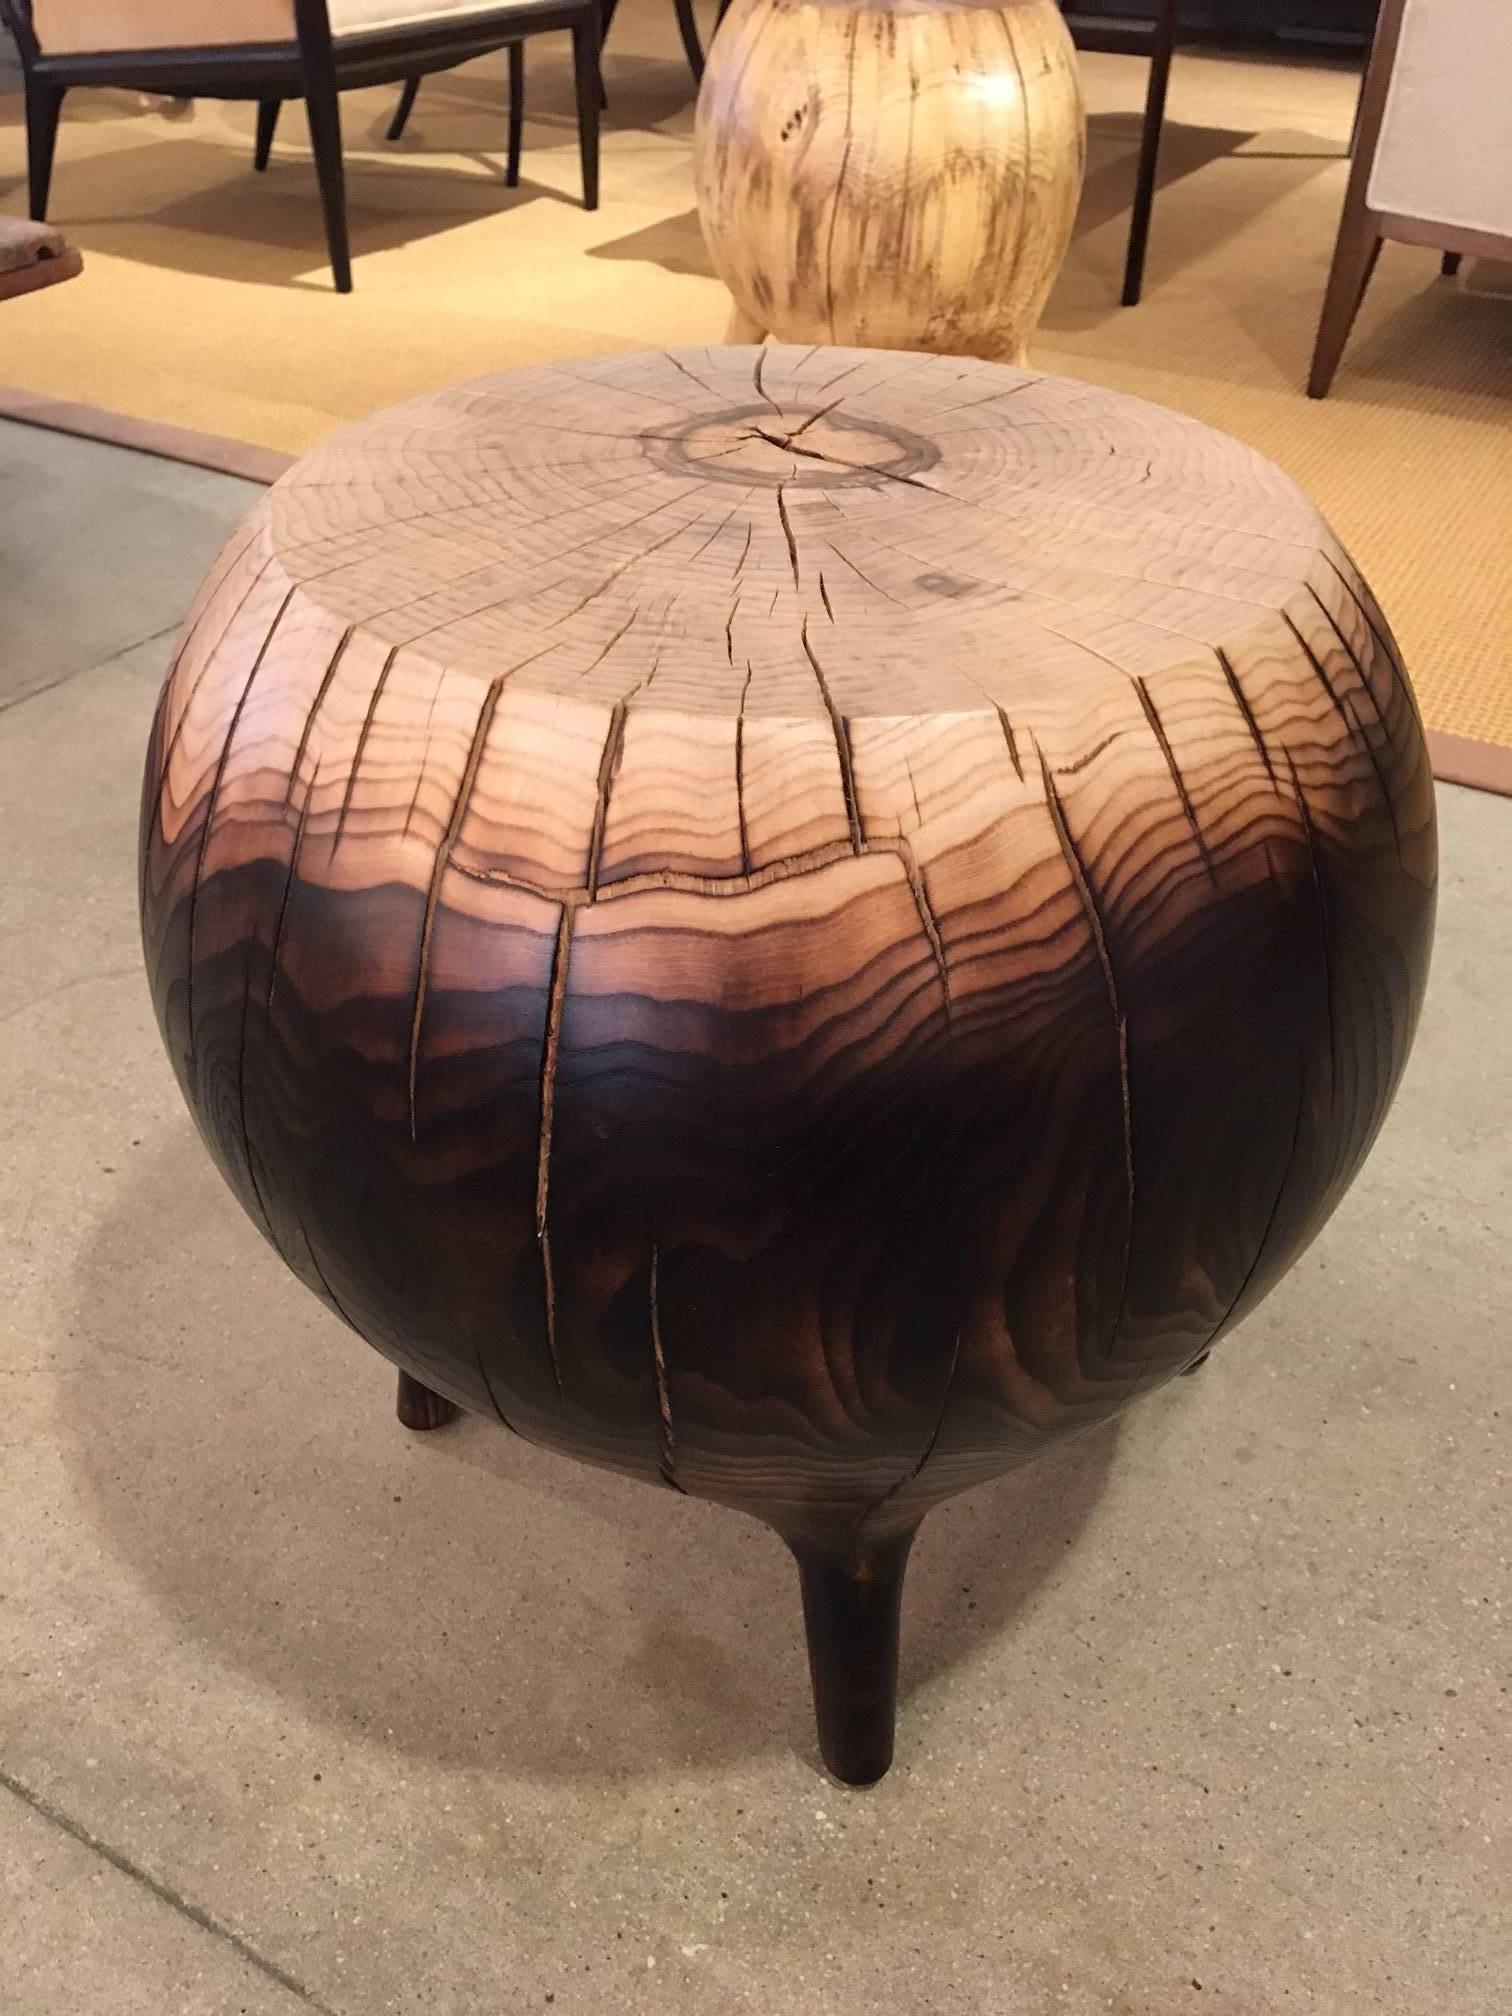 Hand-sculpted side table in ombre, by contemporary artist Caleb Woodard, 2015. The ombré effect is created by a controlled charring process often referred to as 